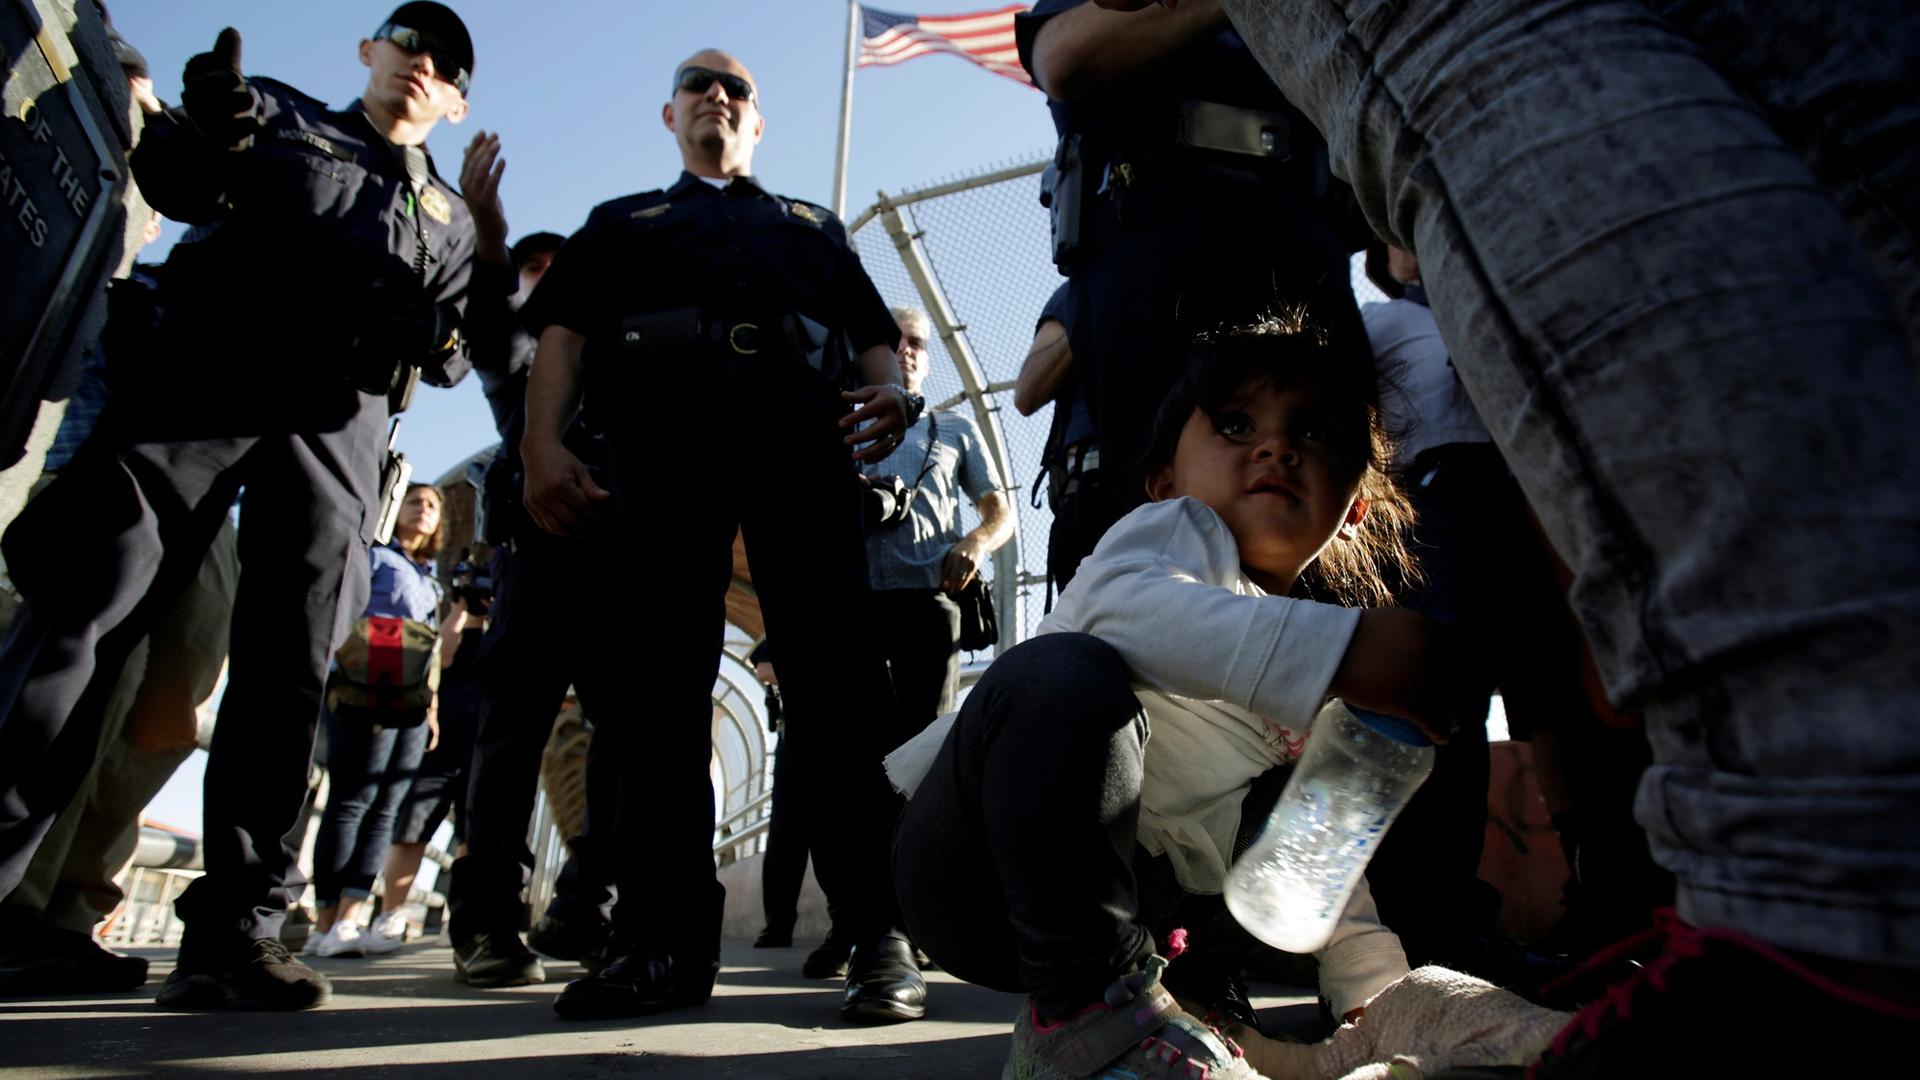 A you migrant girl crouches next to her family as they listen to officers of the US Customs and Border Protection before entering the United States to apply for asylum.